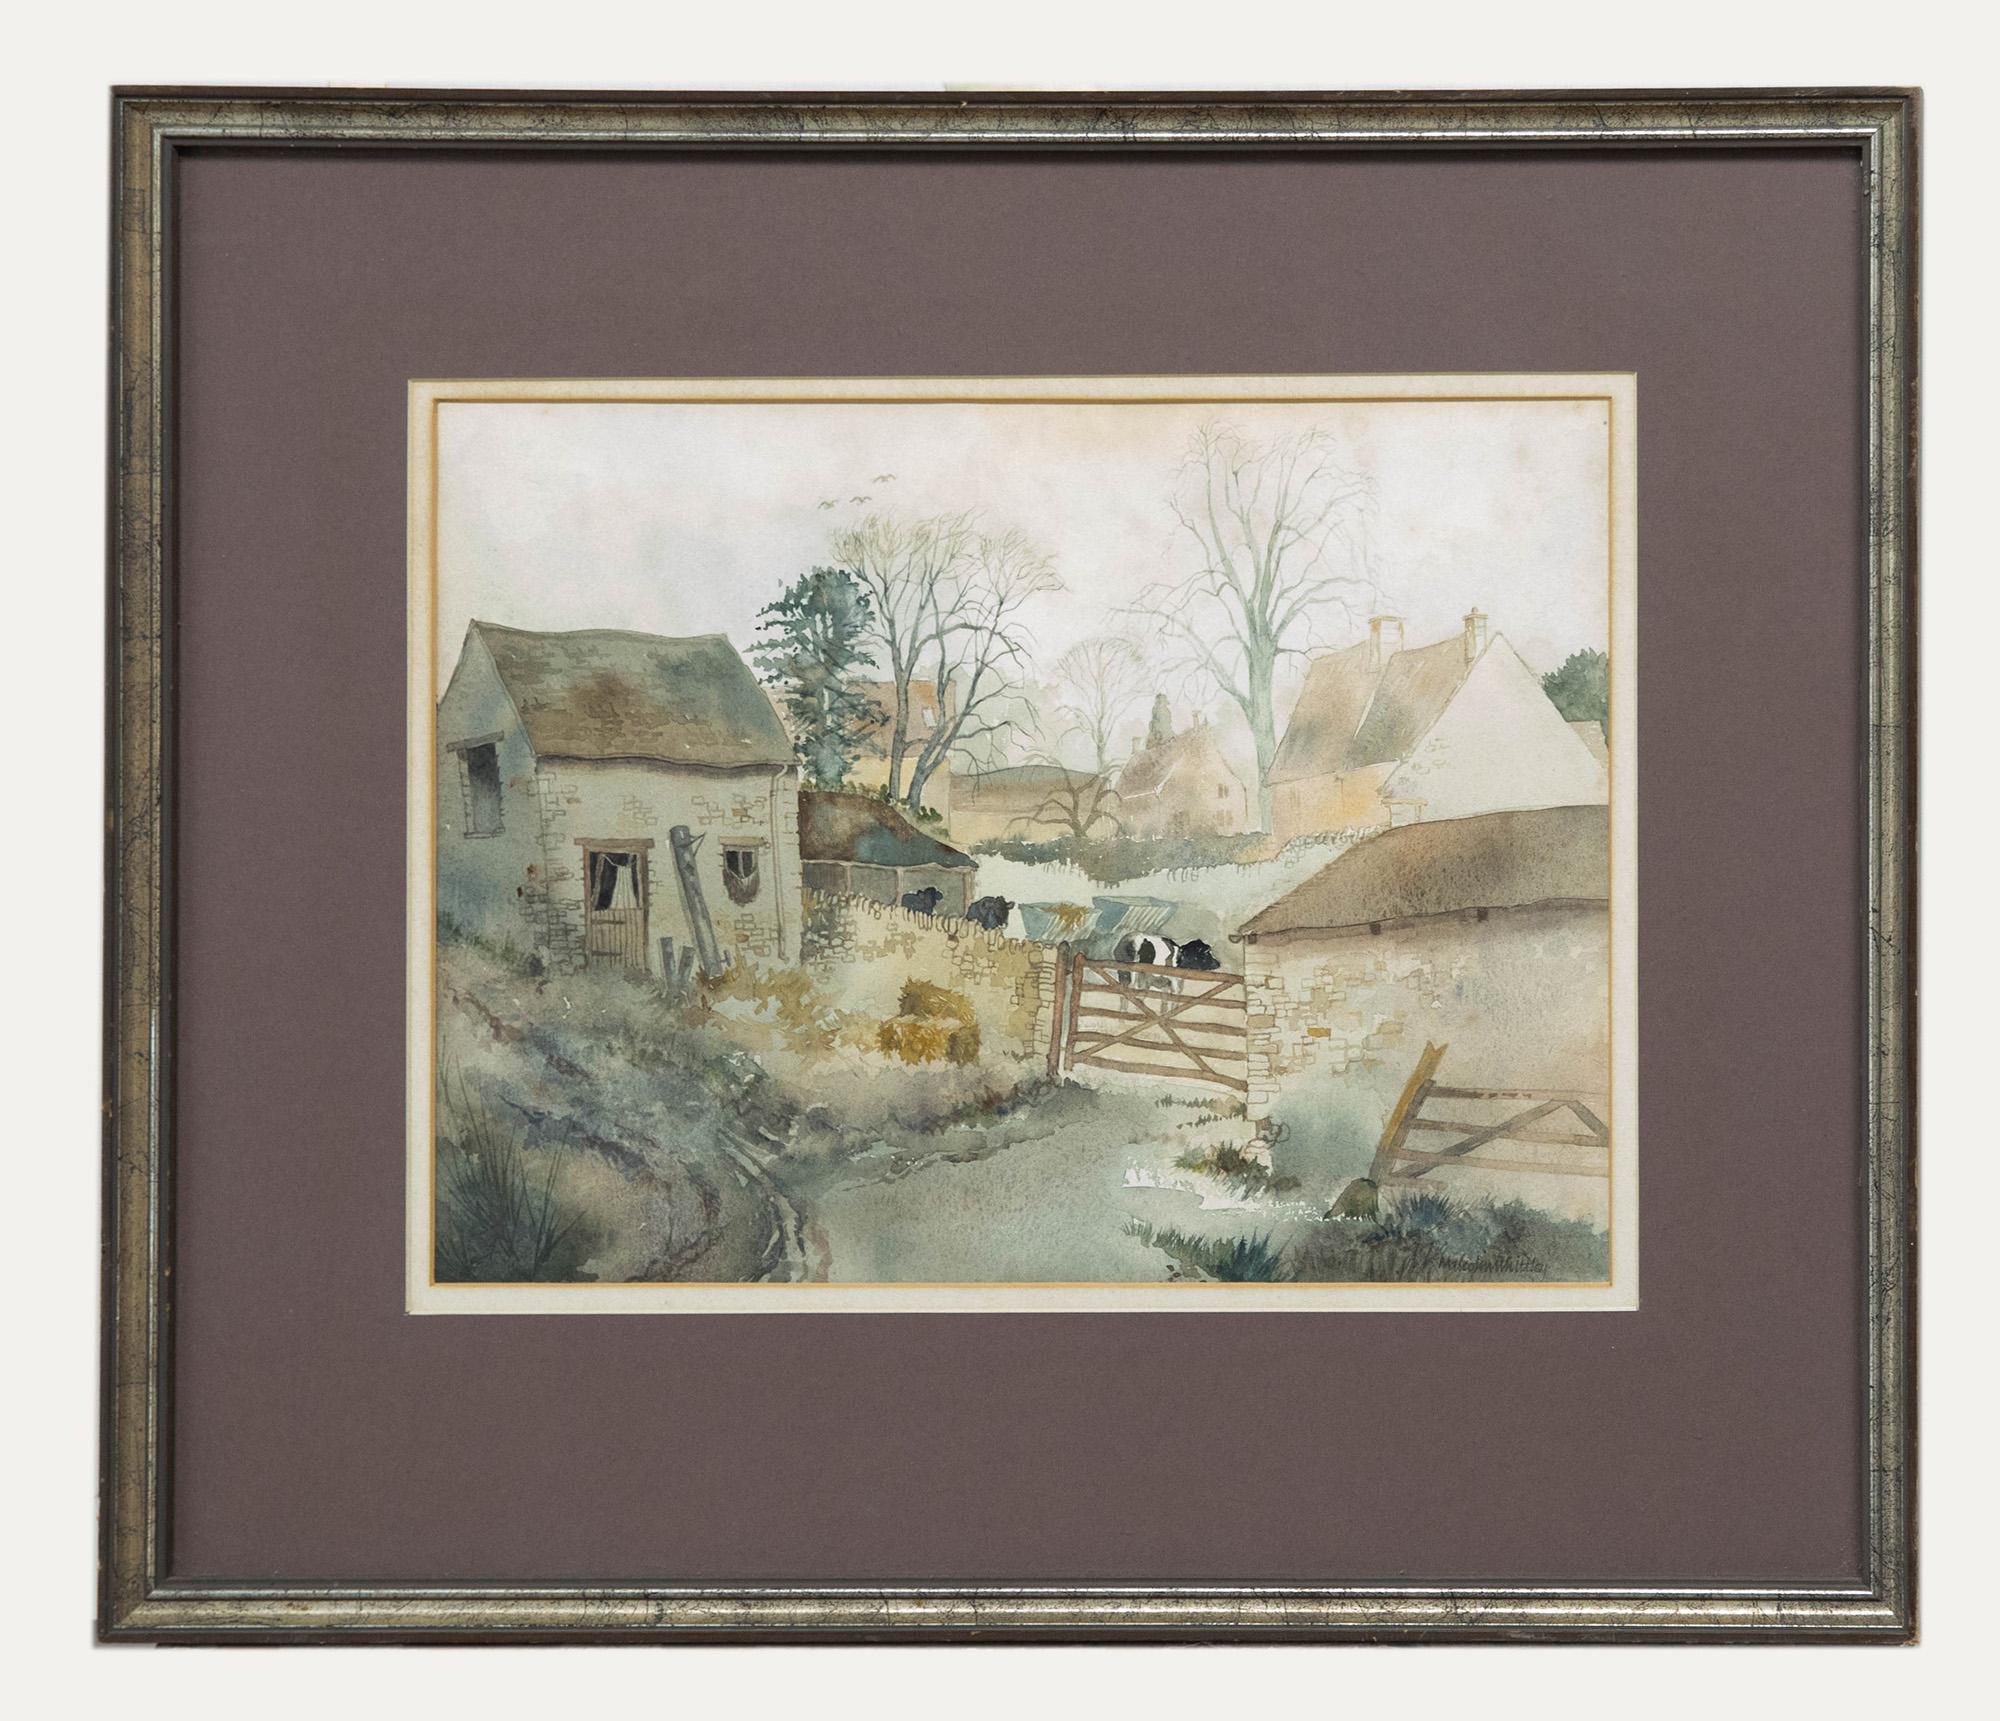 Unknown Landscape Art - Malcolm Whittley- Framed 20th Century Watercolour, The Farmyard, Upper Slaughter